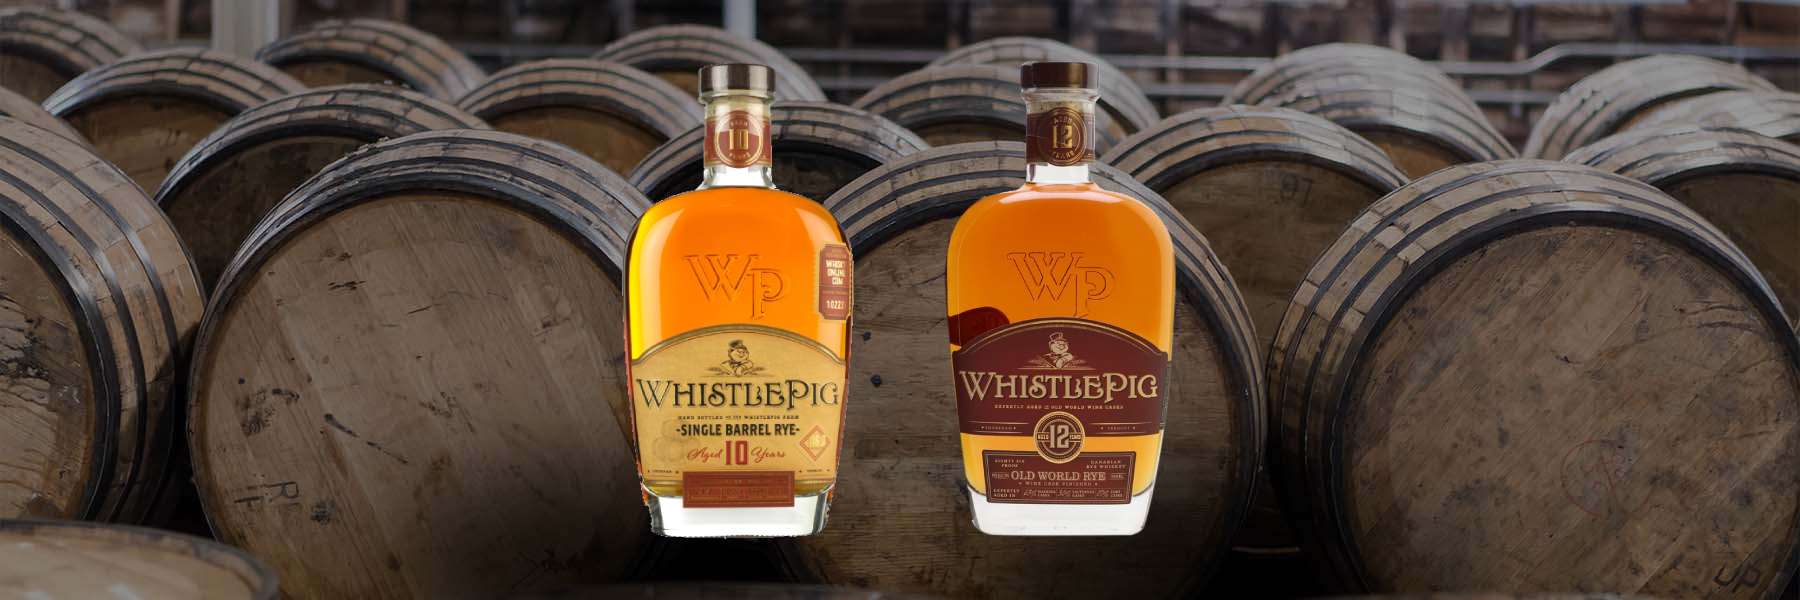 whistlepig 10 year vs 12 year banner